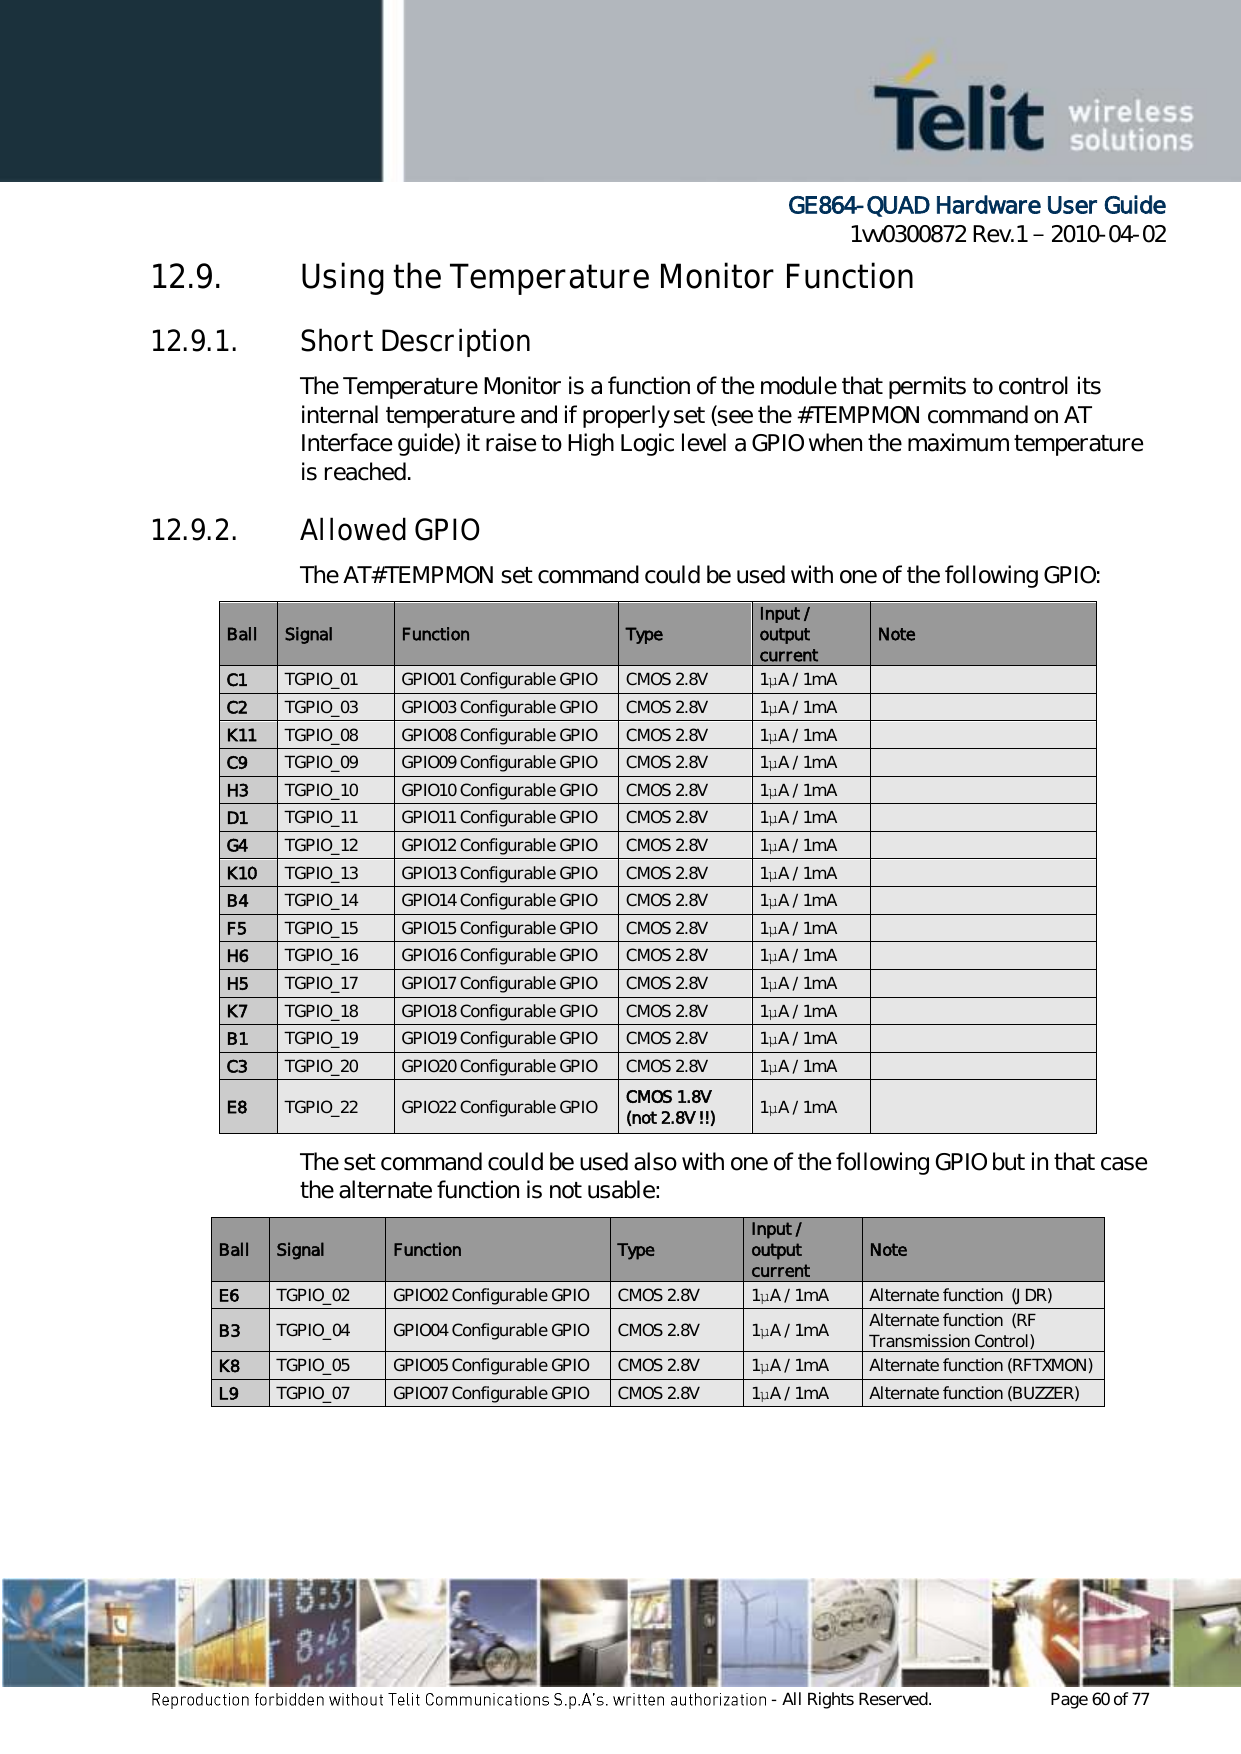      GE864-QUAD Hardware User Guide 1vv0300872 Rev.1   2010-04-02 - All Rights Reserved.    Page 60 of 77  12.9. Using the Temperature Monitor Function 12.9.1. Short Description The Temperature Monitor is a function of the module that permits to control its internal temperature and if properly set (see the #TEMPMON command on AT Interface guide) it raise to High Logic level a GPIO when the maximum temperature is reached. 12.9.2. Allowed GPIO The AT#TEMPMON set command could be used with one of the following GPIO: Ball Signal Function Type Input / output current Note C1 TGPIO_01 GPIO01 Configurable GPIO CMOS 2.8V 1μA / 1mA  C2 TGPIO_03 GPIO03 Configurable GPIO CMOS 2.8V 1μA / 1mA  K11 TGPIO_08 GPIO08 Configurable GPIO CMOS 2.8V 1μA / 1mA  C9 TGPIO_09 GPIO09 Configurable GPIO CMOS 2.8V 1μA / 1mA  H3 TGPIO_10 GPIO10 Configurable GPIO CMOS 2.8V 1μA / 1mA  D1 TGPIO_11 GPIO11 Configurable GPIO CMOS 2.8V 1μA / 1mA  G4 TGPIO_12 GPIO12 Configurable GPIO CMOS 2.8V 1μA / 1mA  K10 TGPIO_13 GPIO13 Configurable GPIO CMOS 2.8V 1μA / 1mA  B4 TGPIO_14 GPIO14 Configurable GPIO CMOS 2.8V 1μA / 1mA  F5 TGPIO_15 GPIO15 Configurable GPIO CMOS 2.8V 1μA / 1mA  H6 TGPIO_16 GPIO16 Configurable GPIO CMOS 2.8V 1μA / 1mA  H5 TGPIO_17 GPIO17 Configurable GPIO CMOS 2.8V 1μA / 1mA  K7 TGPIO_18 GPIO18 Configurable GPIO CMOS 2.8V 1μA / 1mA  B1 TGPIO_19 GPIO19 Configurable GPIO CMOS 2.8V 1μA / 1mA  C3 TGPIO_20 GPIO20 Configurable GPIO CMOS 2.8V 1μA / 1mA  E8 TGPIO_22 GPIO22 Configurable GPIO CMOS 1.8V (not 2.8V !!) 1μA / 1mA  The set command could be used also with one of the following GPIO but in that case the alternate function is not usable: Ball Signal Function Type Input / output current Note E6 TGPIO_02 GPIO02 Configurable GPIO CMOS 2.8V 1μA / 1mA Alternate function  (JDR) B3 TGPIO_04 GPIO04 Configurable GPIO CMOS 2.8V 1μA / 1mA Alternate function  (RF Transmission Control) K8 TGPIO_05 GPIO05 Configurable GPIO CMOS 2.8V 1μA / 1mA Alternate function (RFTXMON) L9 TGPIO_07 GPIO07 Configurable GPIO CMOS 2.8V 1μA / 1mA Alternate function (BUZZER)  